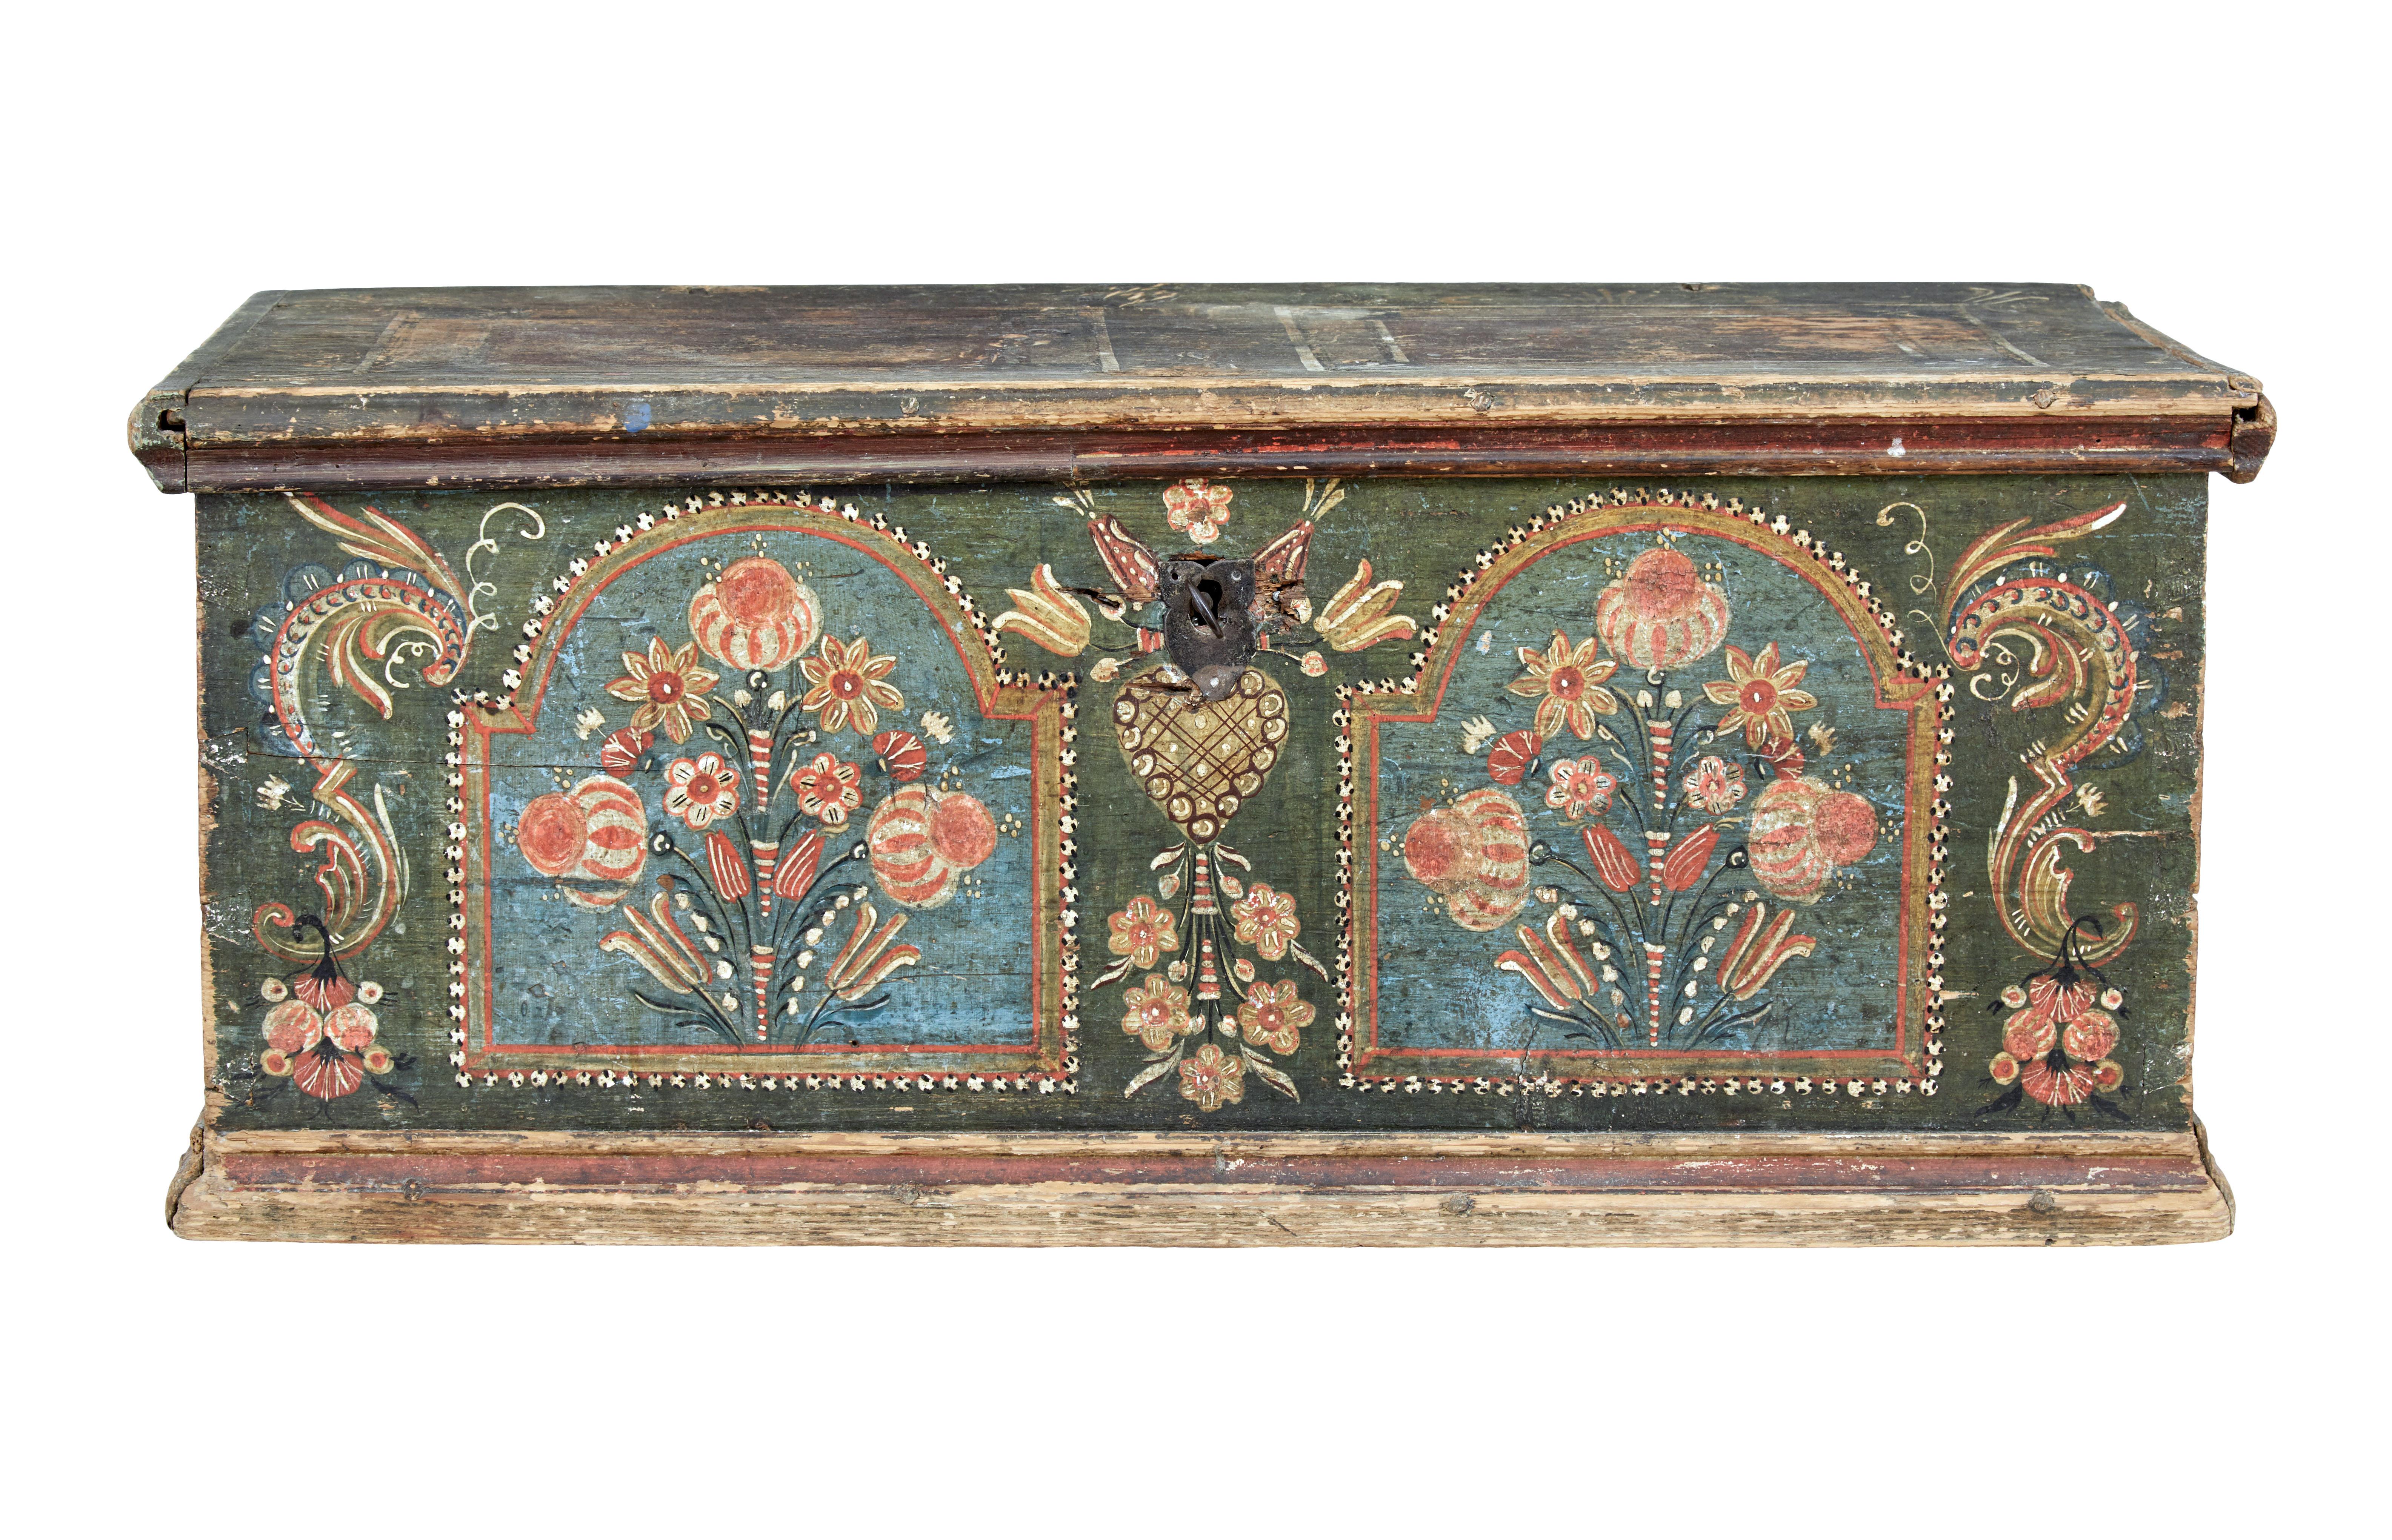 Early 19th century hand painted Swedish Folk Art pine box circa 1828.

We have dealt with a few of these boxes over the years, but this is one of the finest. Lovingly hand painted in greens and oranges depicting floral decoration. Signed in the